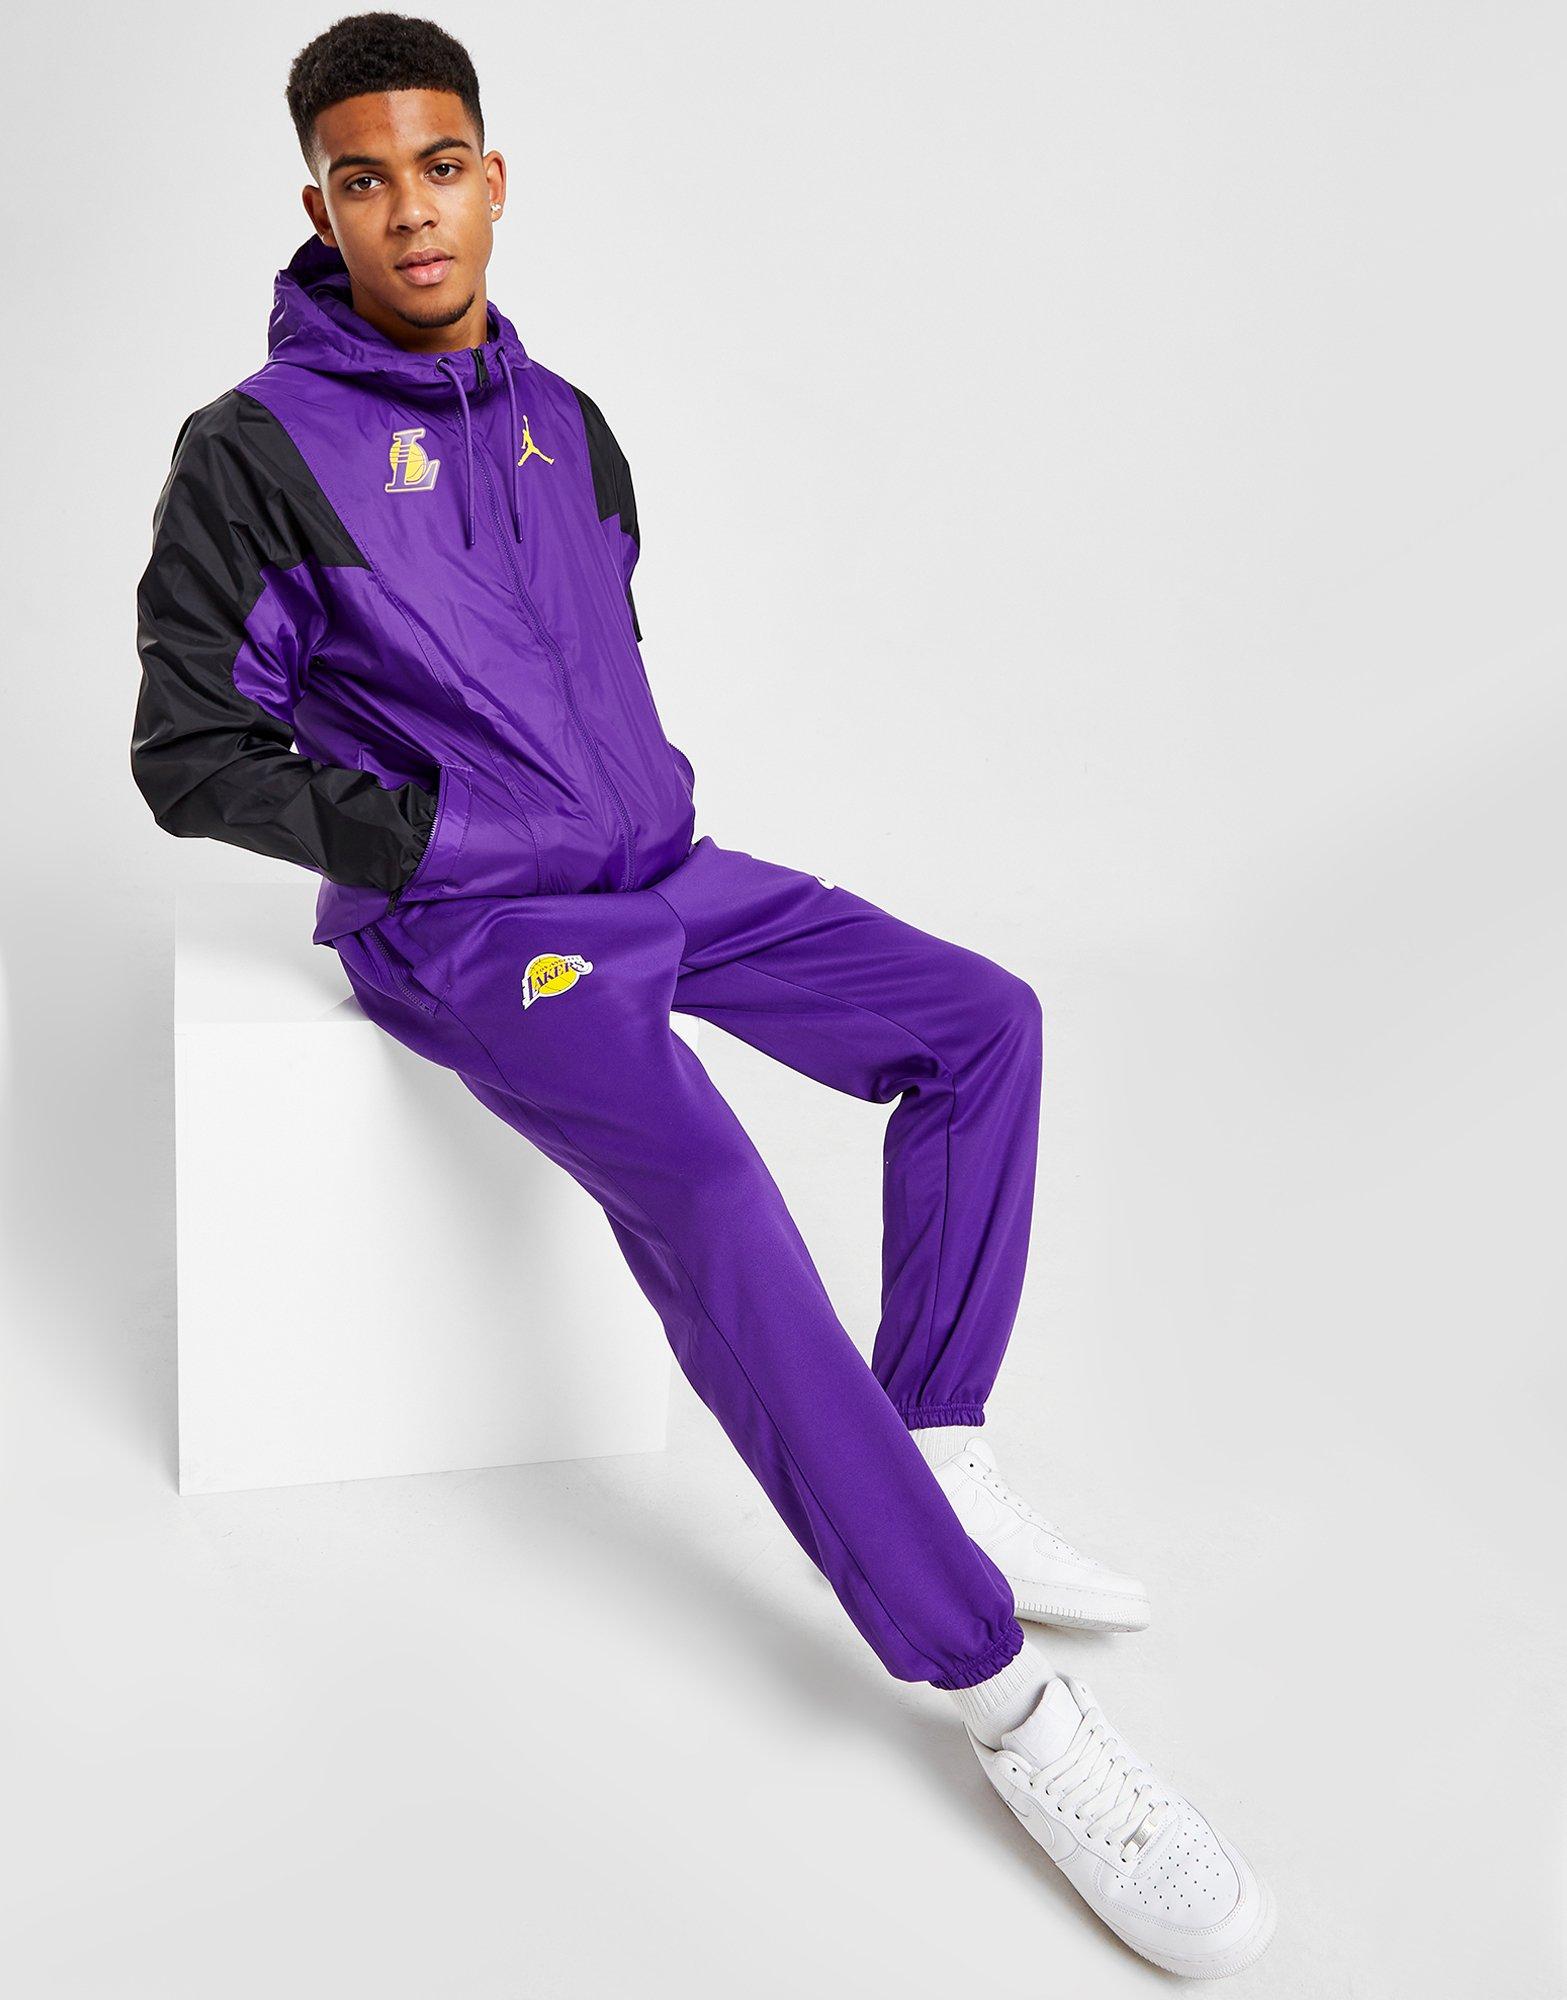 Buy NBA LA LAKERS TRACKSUIT COURTSIDE for N/A 0.0 | Kickz-DE-AT-INT